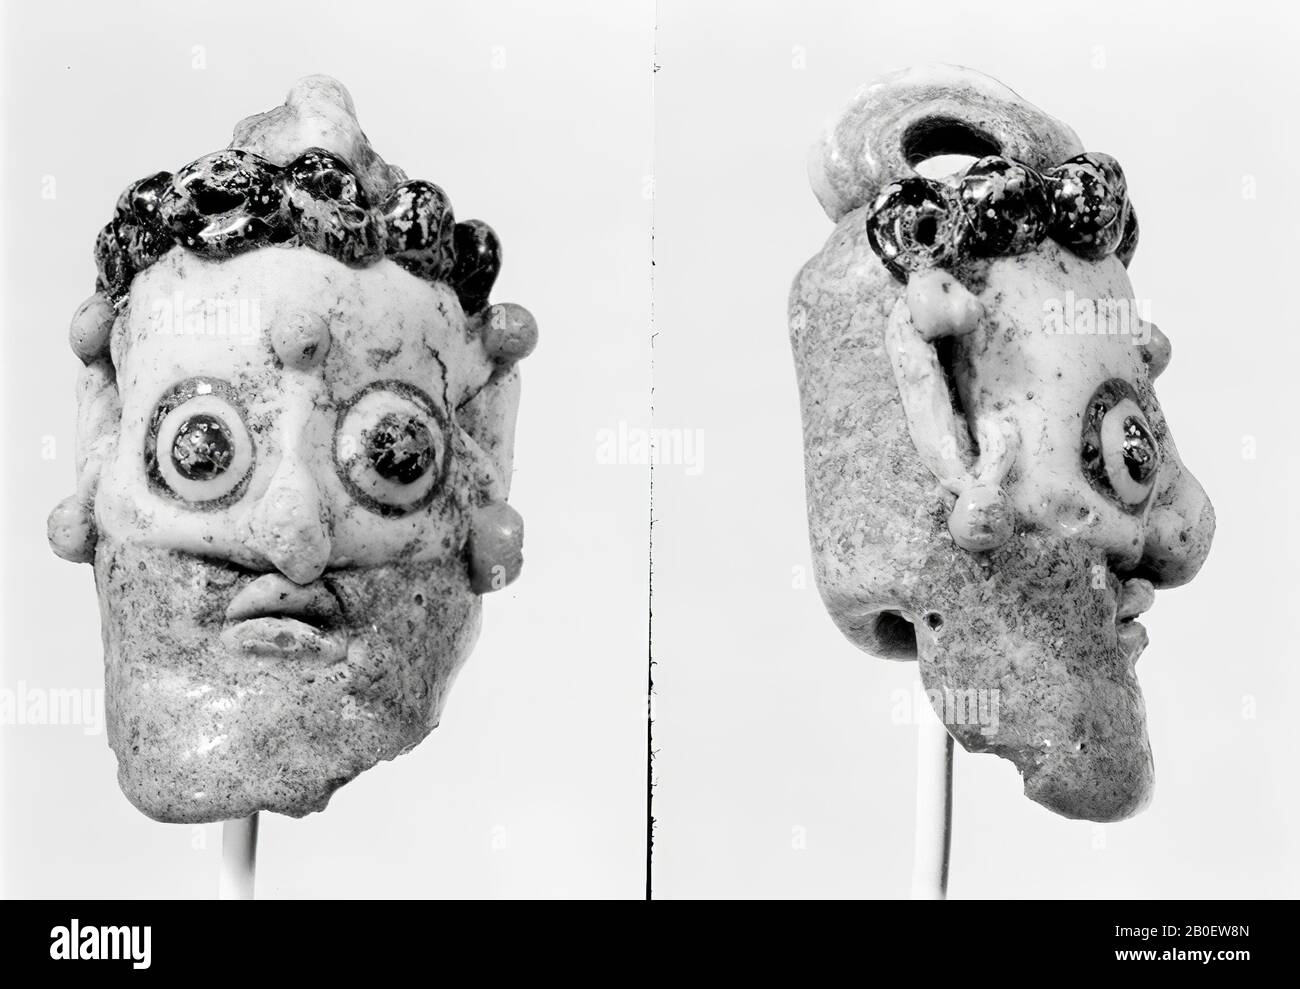 mask, Carthaginian face of white and light blue glass, details applied with dark blue. White face with a nose nose, ears, hair and beard of turquoise glass. On the forehead are six blue balls and in the middle of the forehead is a yellow dot. Earrings of yellow glass are placed above and below both ears. Large convex eyes that are delineated with dark blue, the yellow lips are attached separately., Amulet, person, glass, sand core method, 2.1 x 1.3 x 3.4 cm, Greco-Roman Period 5th-3rd Century BC, Egypt Stock Photo